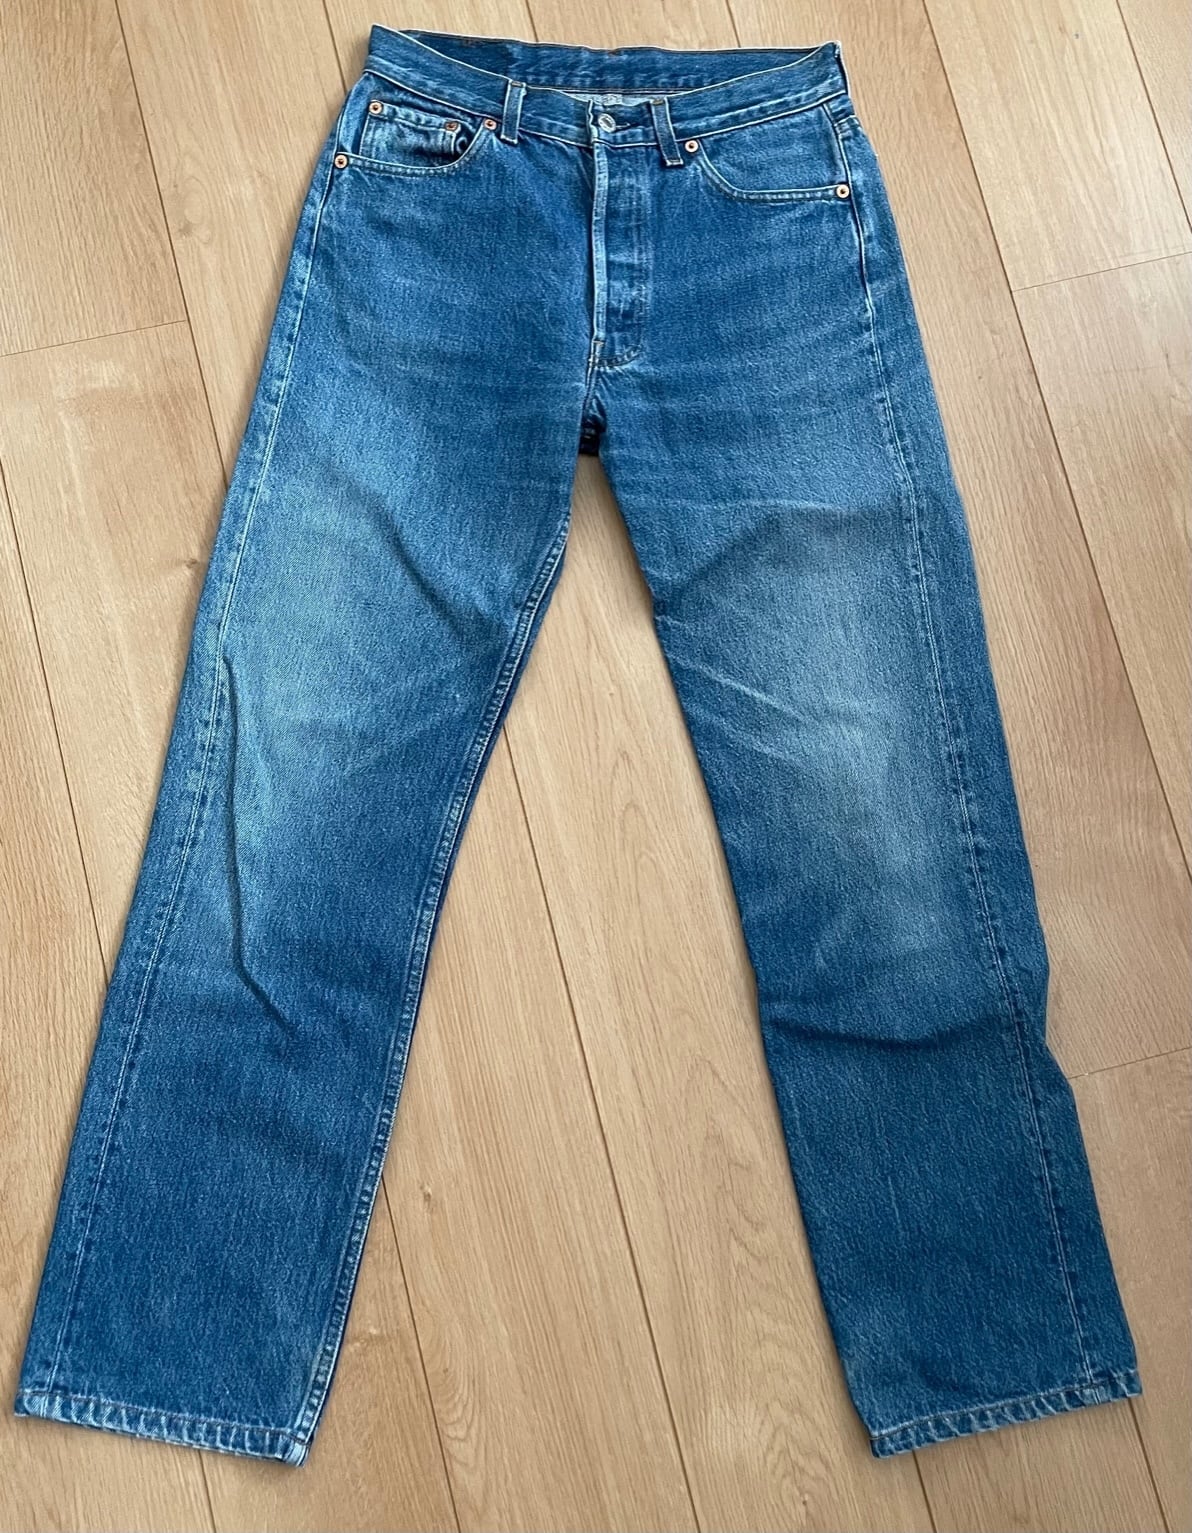 Levi’s 501 MADE IN THE USA W30